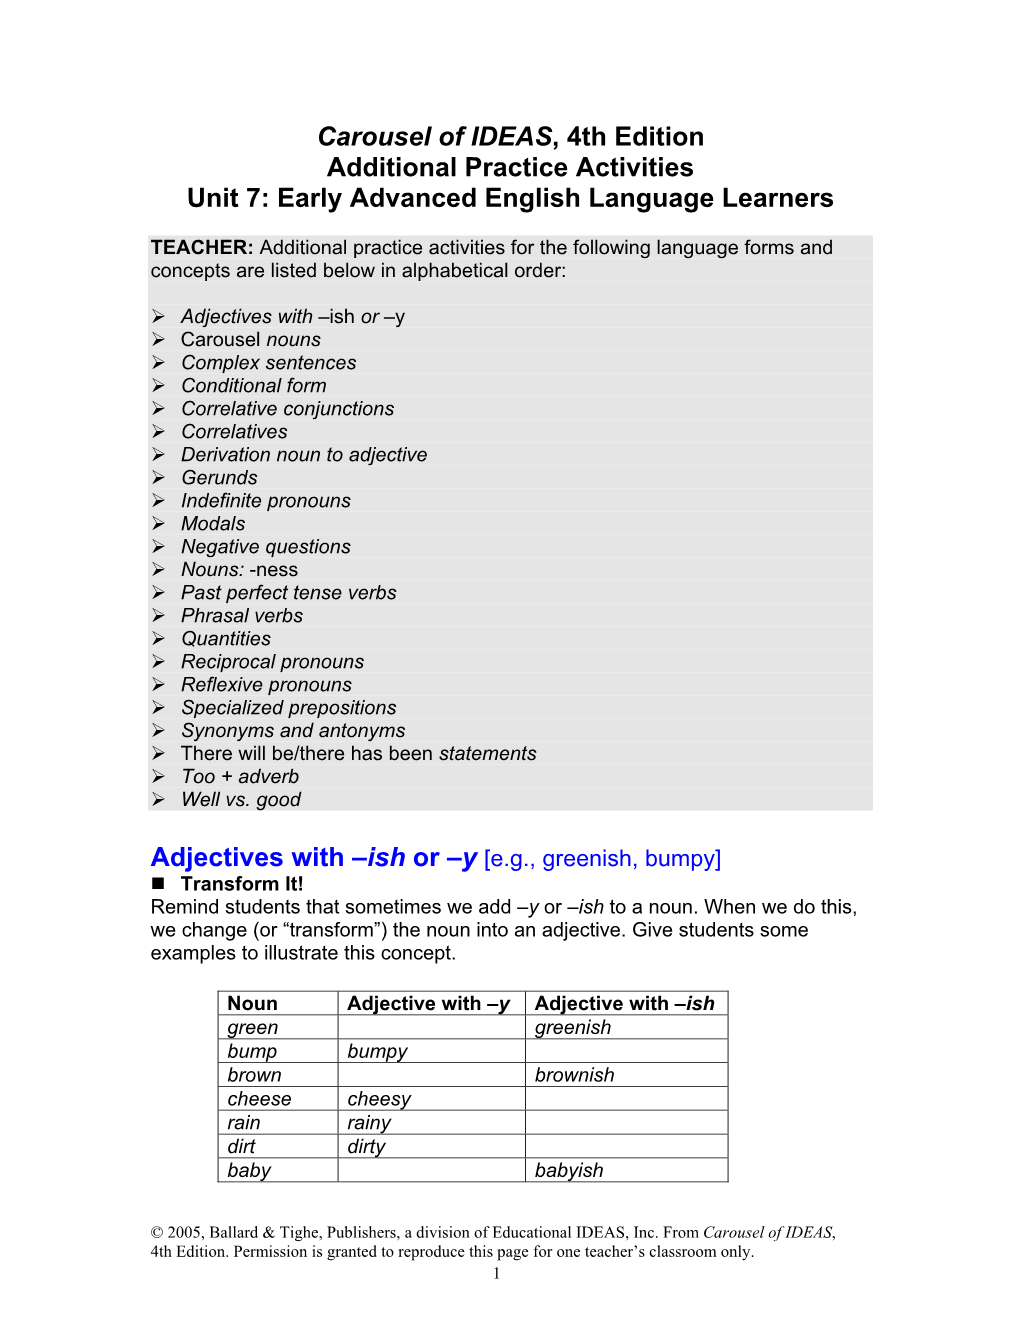 Carousel of IDEAS, 4Th Edition Additional Practice Activities Unit 7: Early Advanced English Language Learners